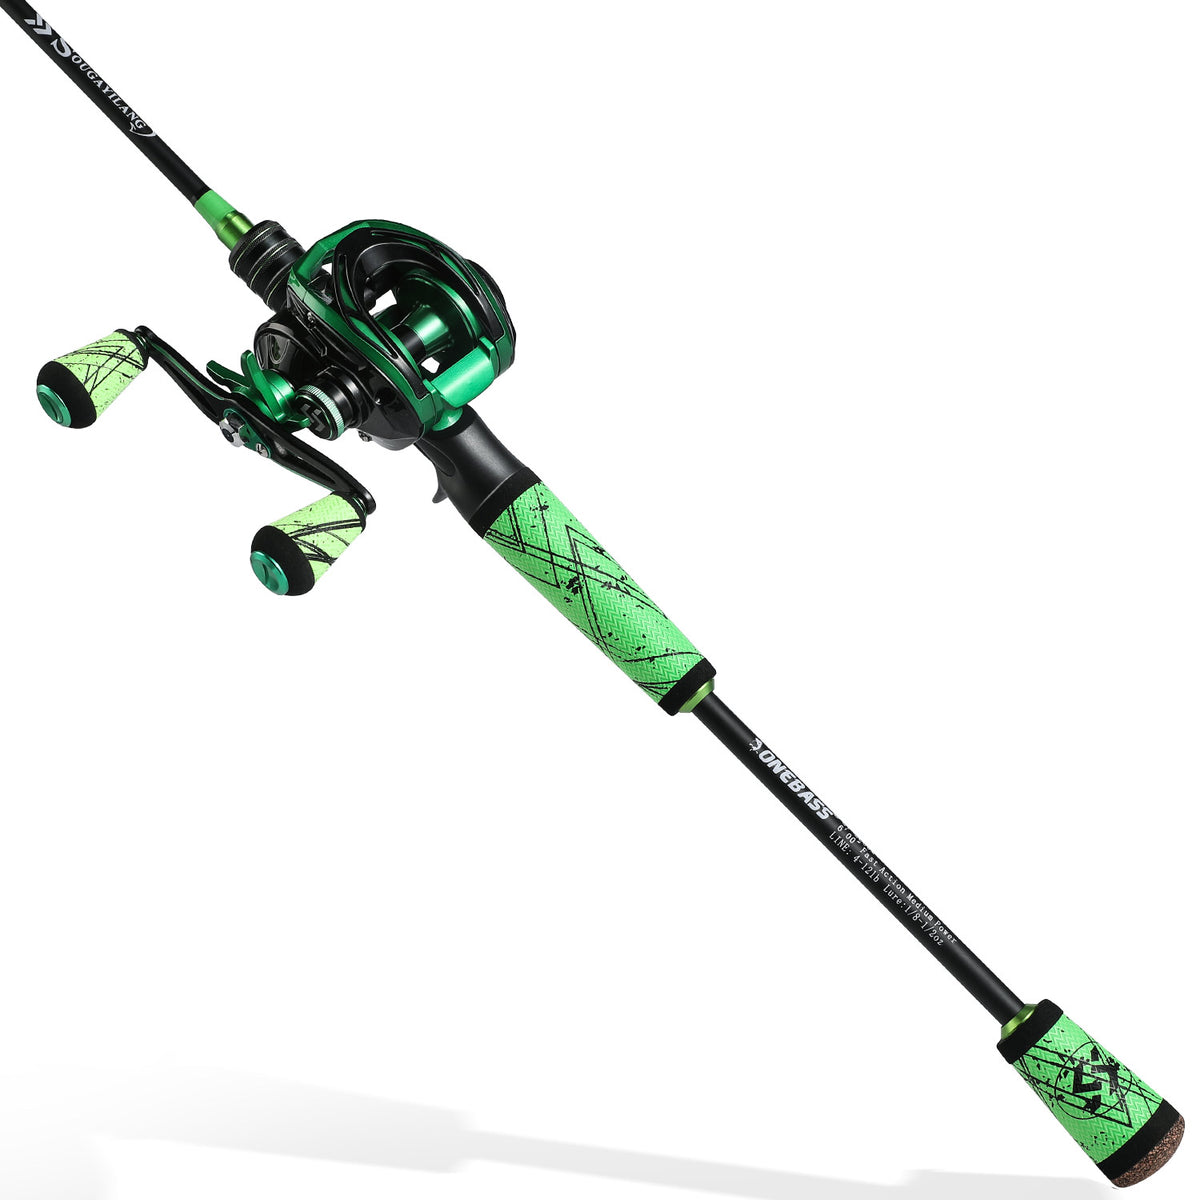 One Bass Fishing Pole 24 Ton Carbon Fiber Casting and Spinning Rods - Two Pieces, SuperPolymer Handle Fishing Rod for Bass Fishing